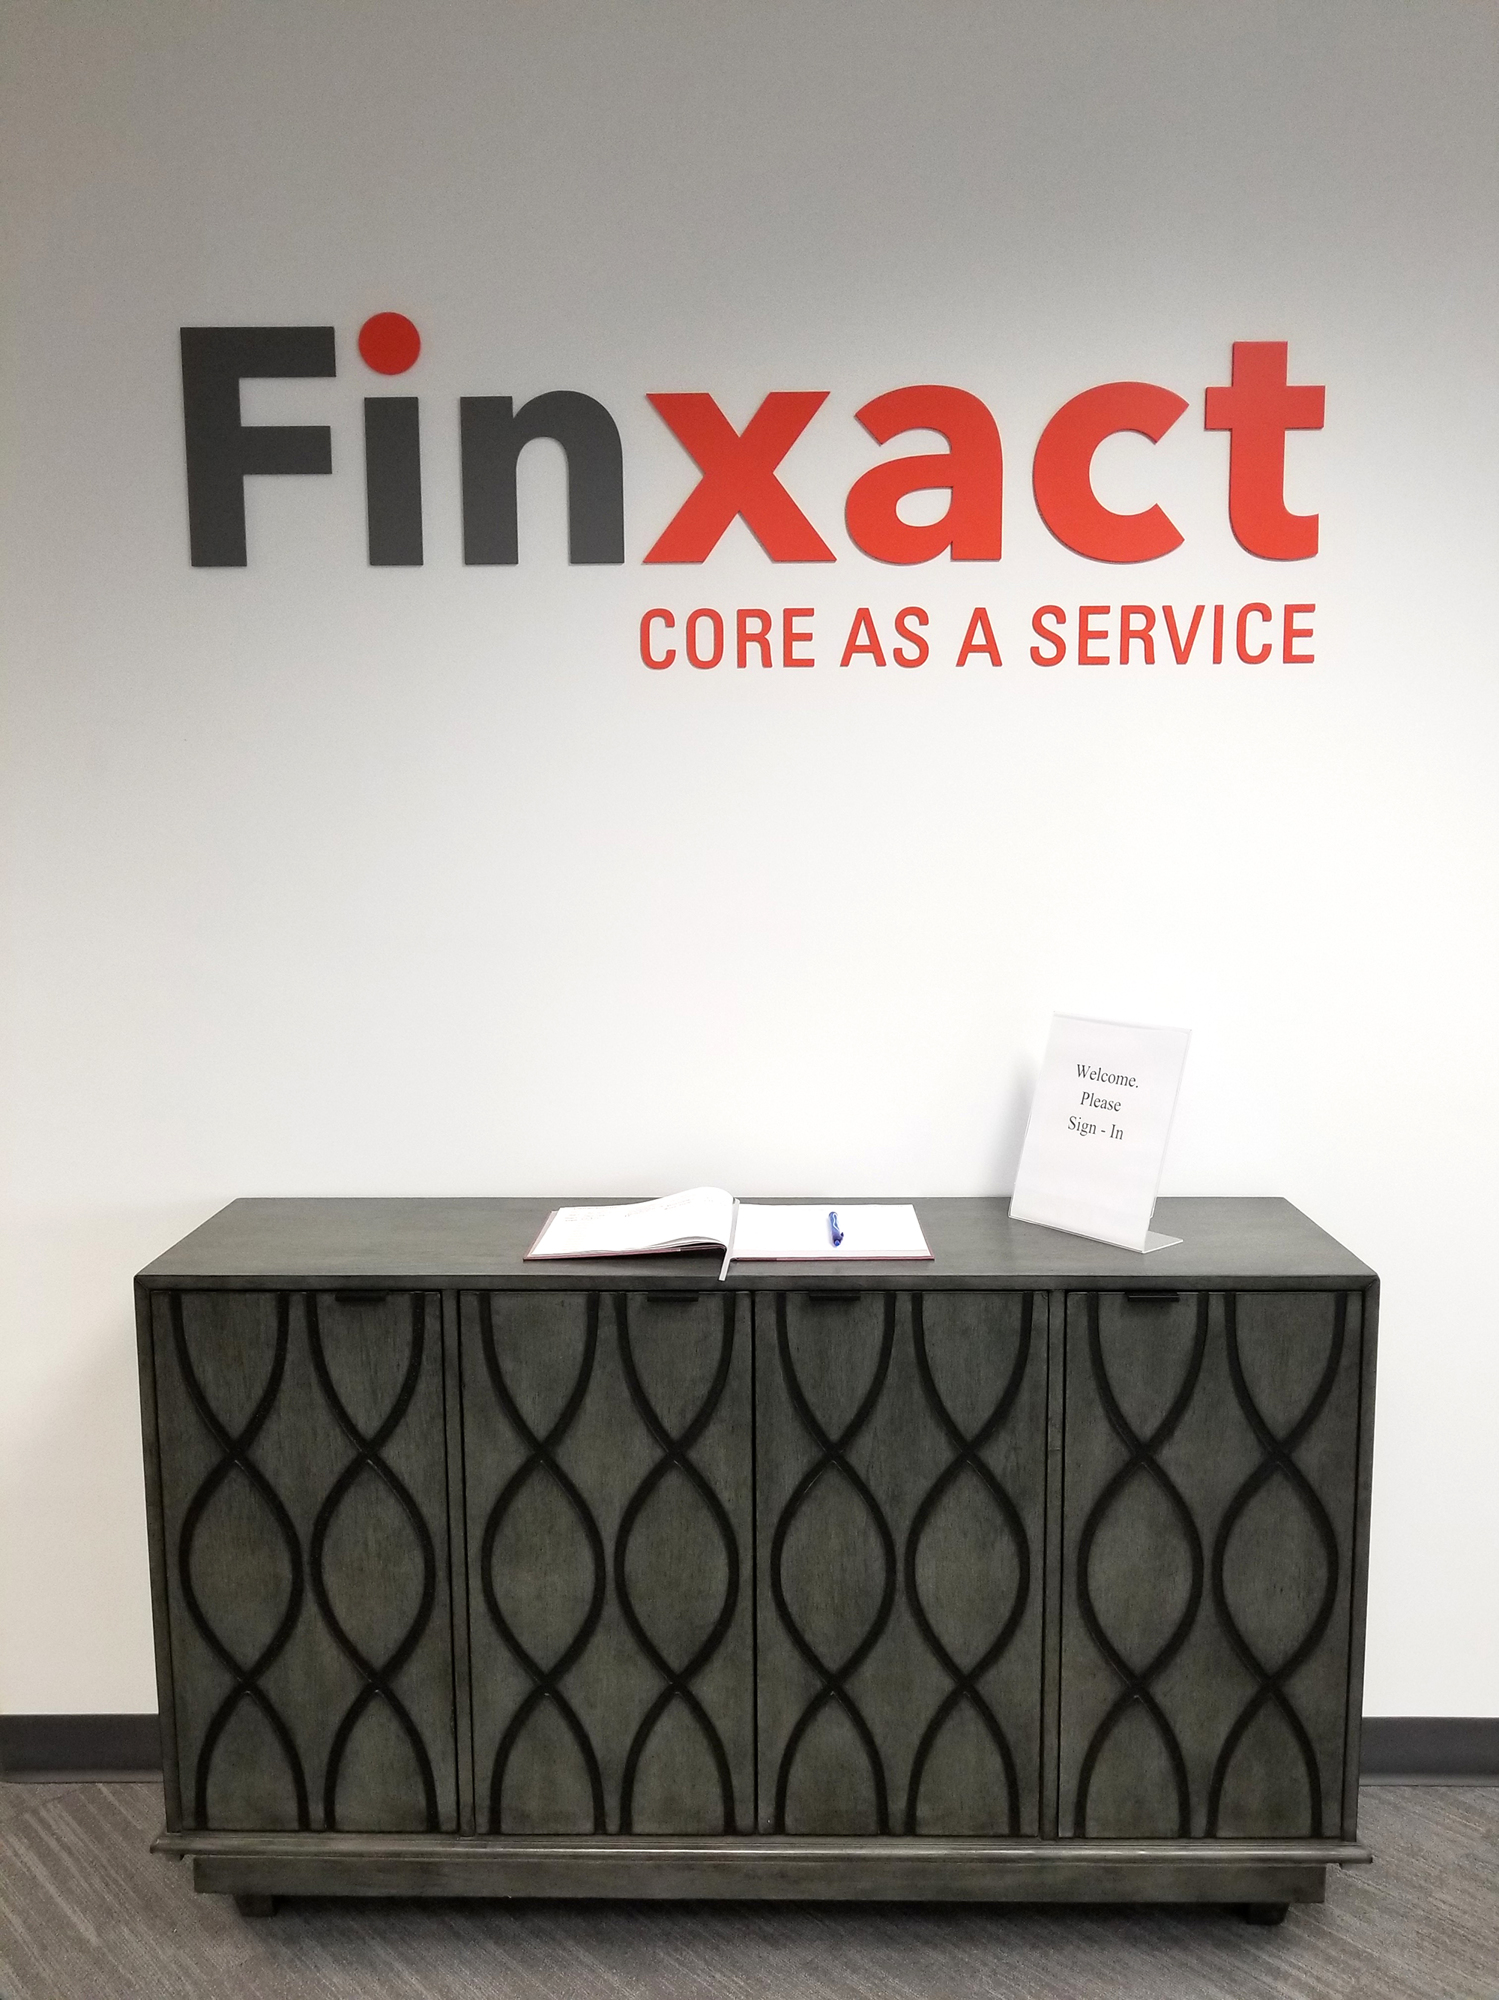 Finxact uses 3,500 feet of space in its Riverplace Tower office.